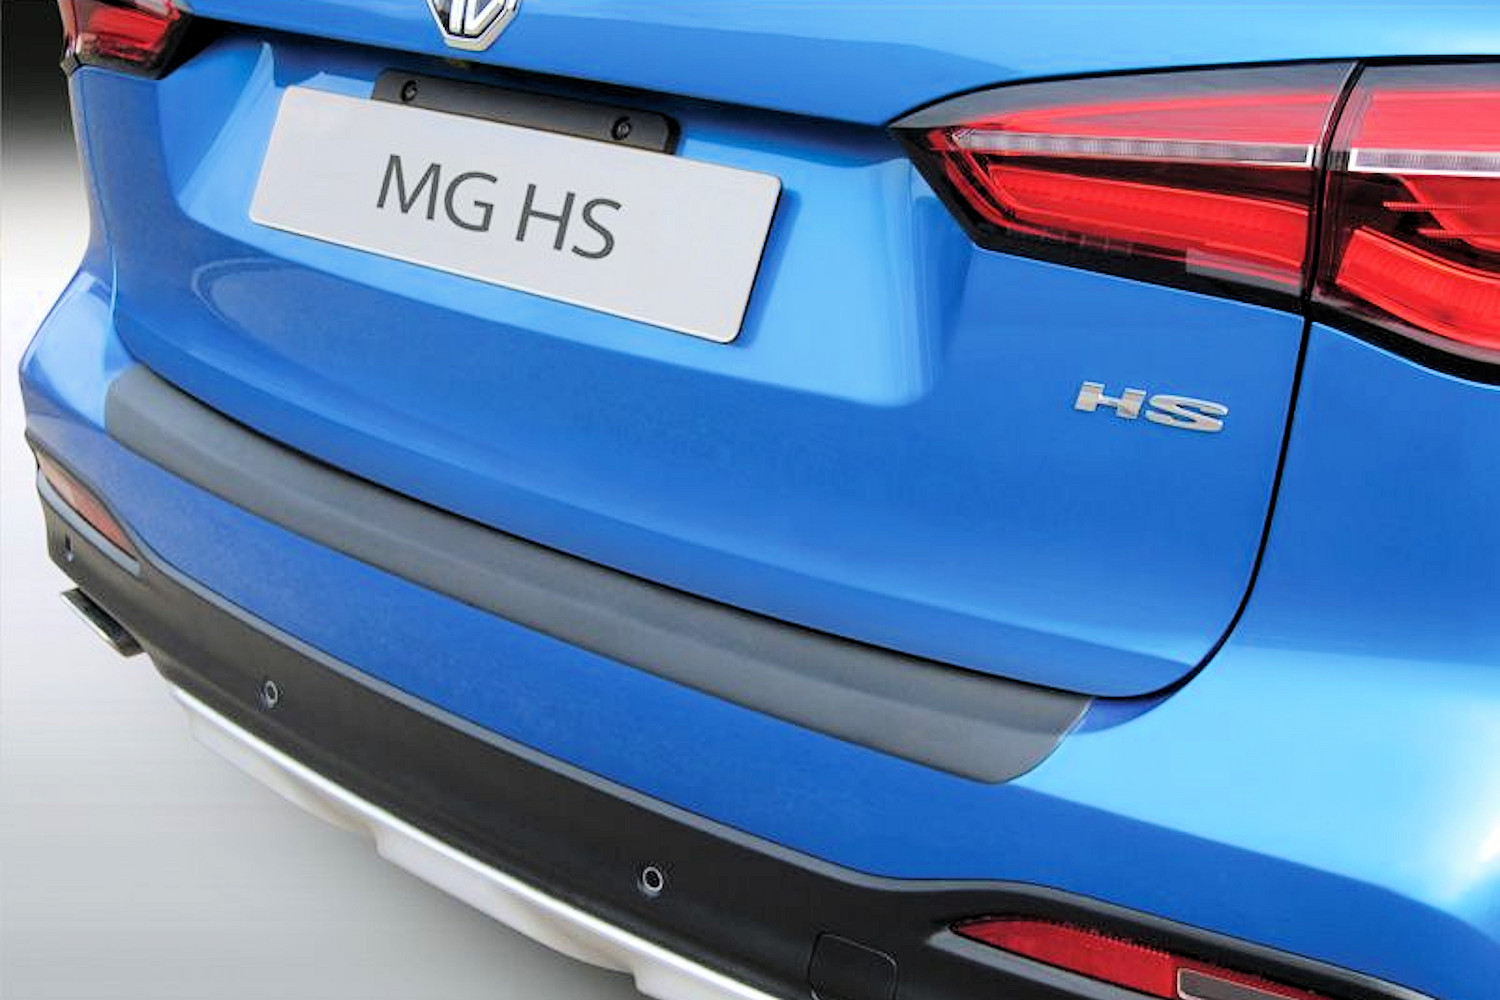 https://www.carparts-expert.com/images/stories/virtuemart/product/mg1hsbp-rear-bumper-protector-mg-hs-2018-abs-1.jpg